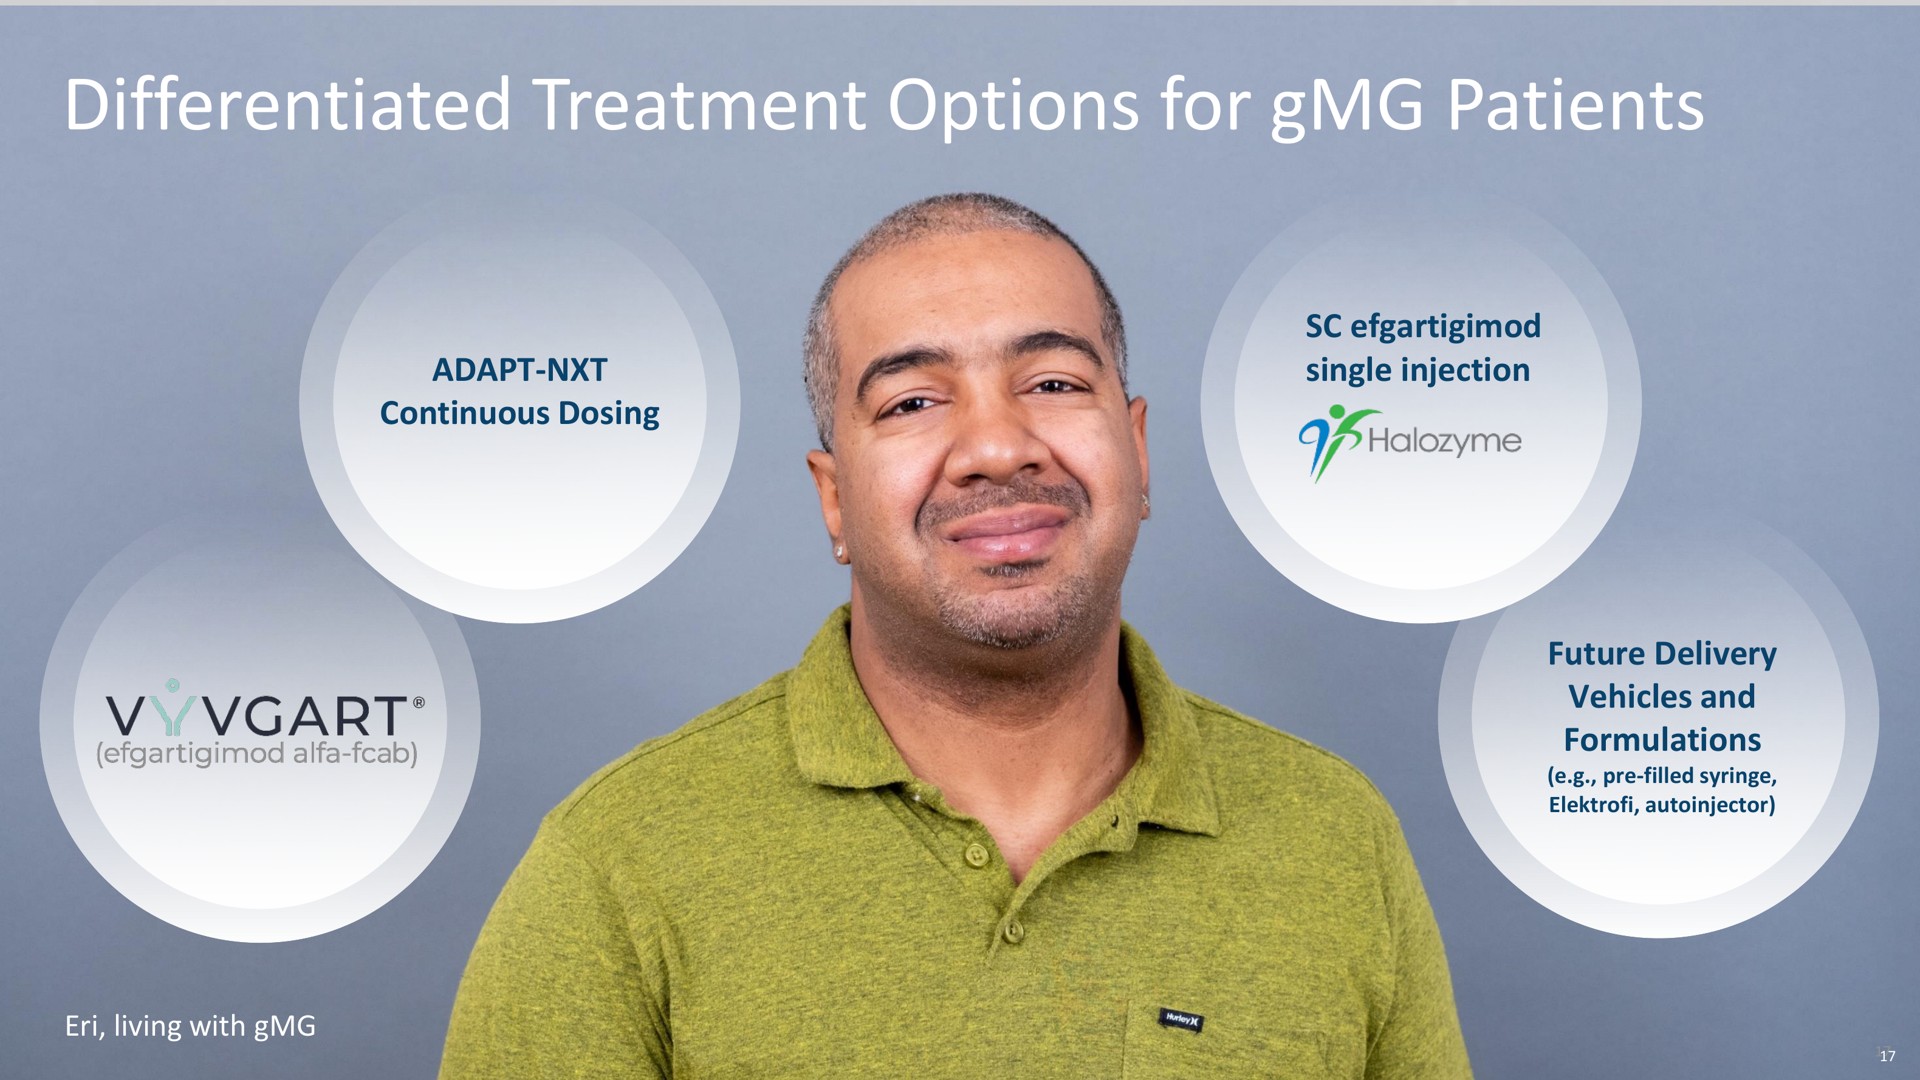 differentiated treatment options for patients | argenx SE